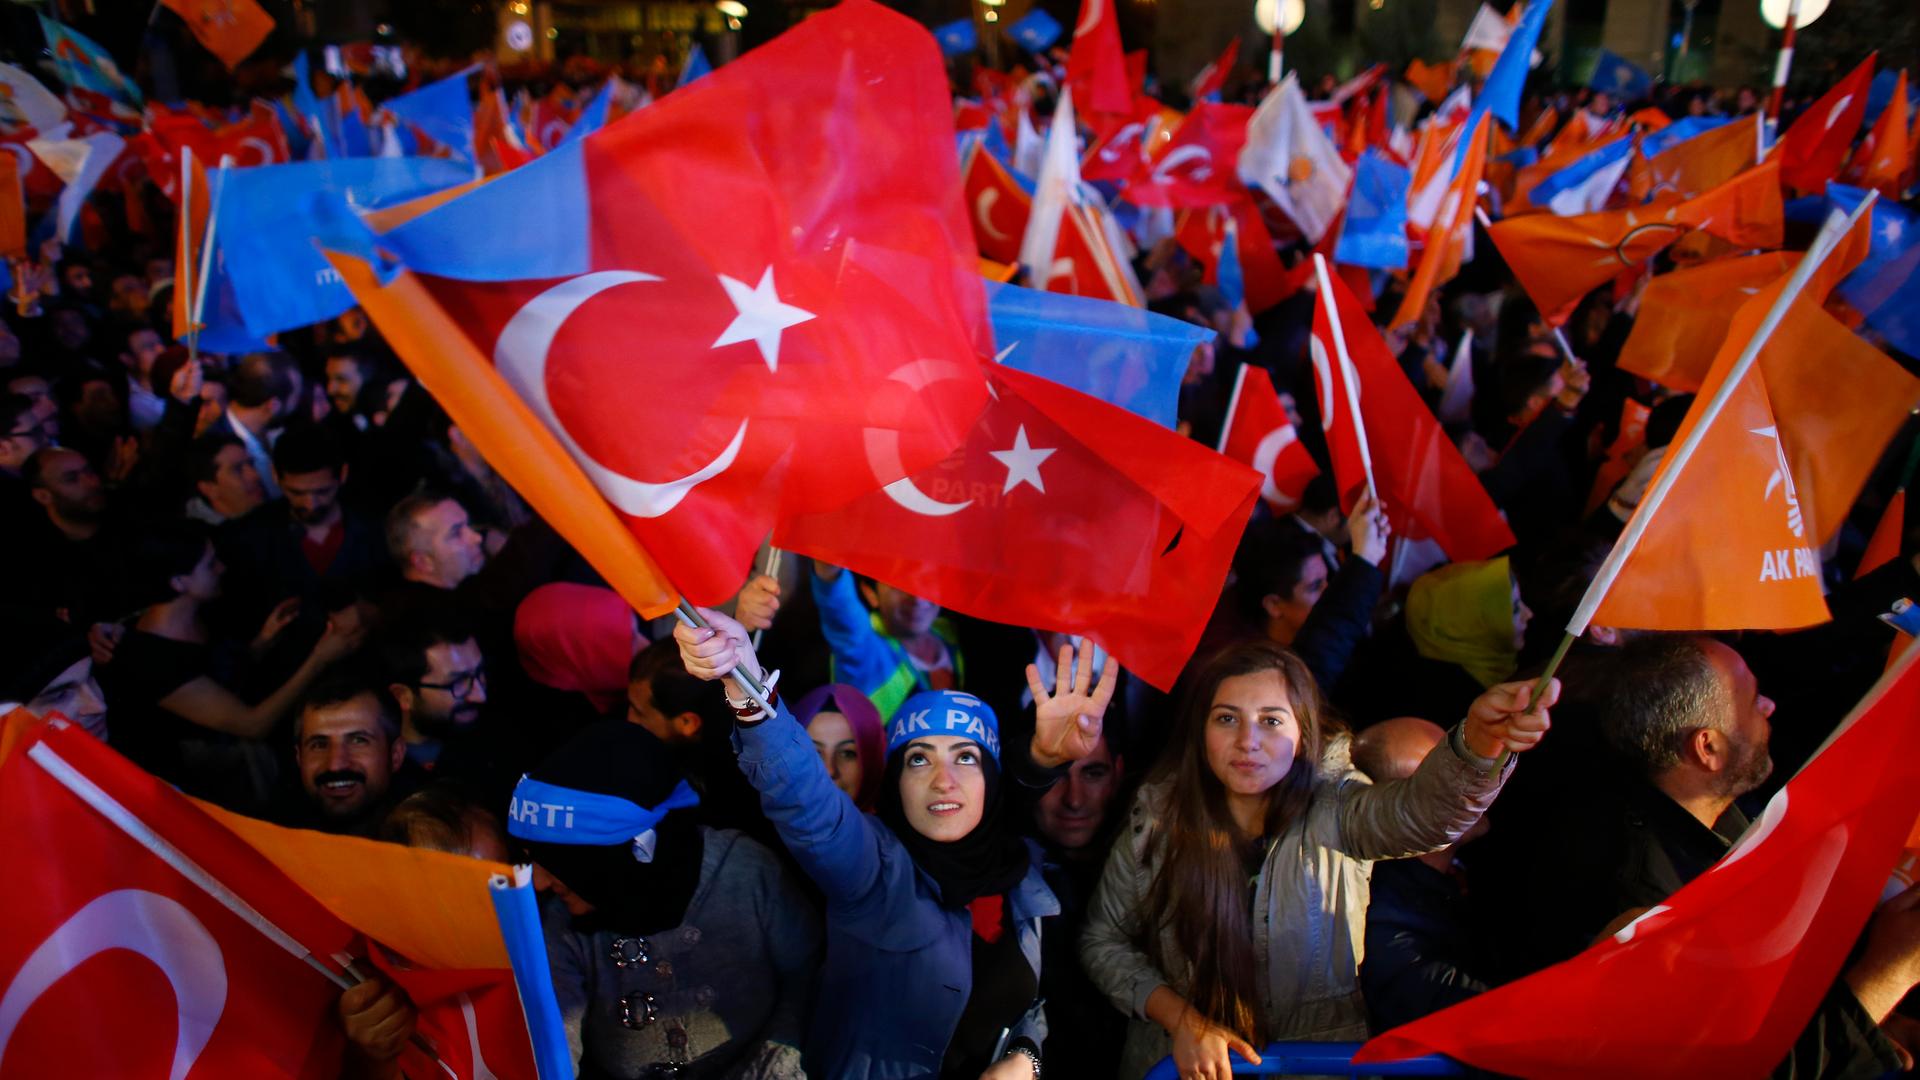 Women wave flags outside the AKP headquarters in Ankara, Turkey. Turkish Prime Minister Ahmet Davutoglu described the outcome of a general election which swept his AKP back to a parliamentary majority on Sunday as a victory for democracy.